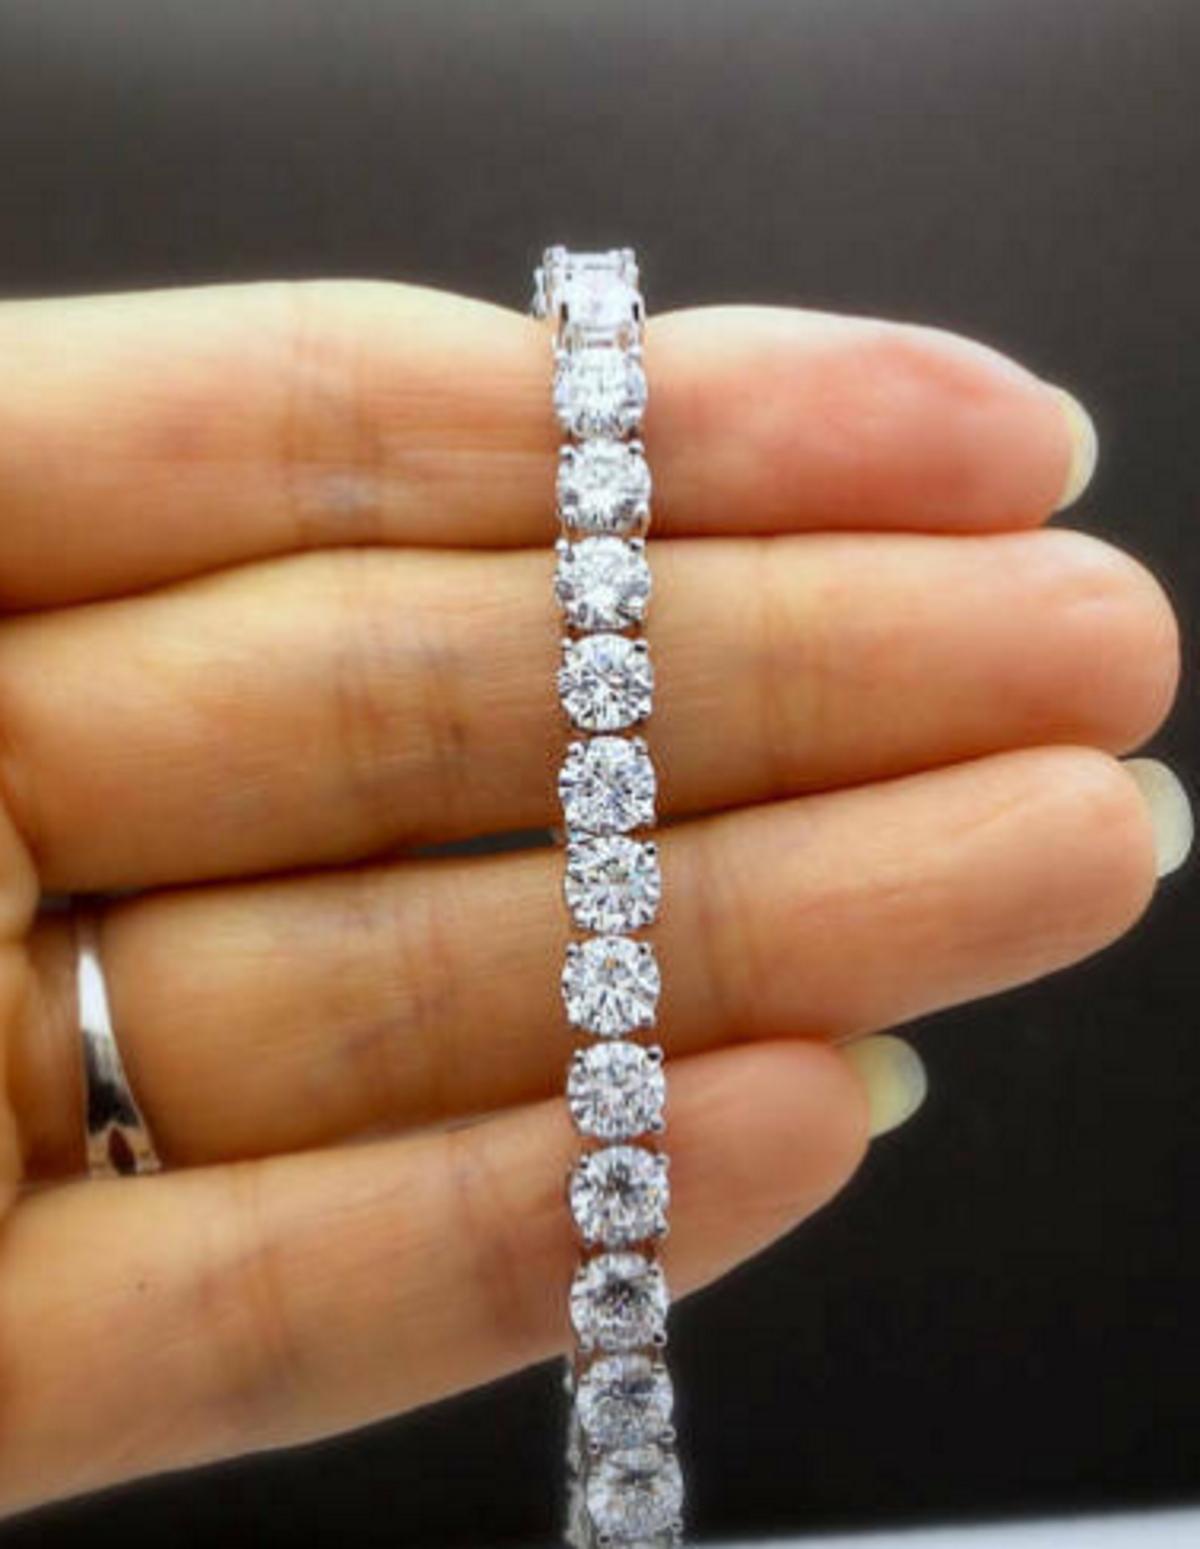 This gorgeous 21 Ct necklace will simply take your breath away! It features a 65 natural round brilliant cut diamonds.These sparkling diamonds conservatively grade as F/G VS1-SI1 in quality. The diamonds graduate in size and set in a 18 carat white